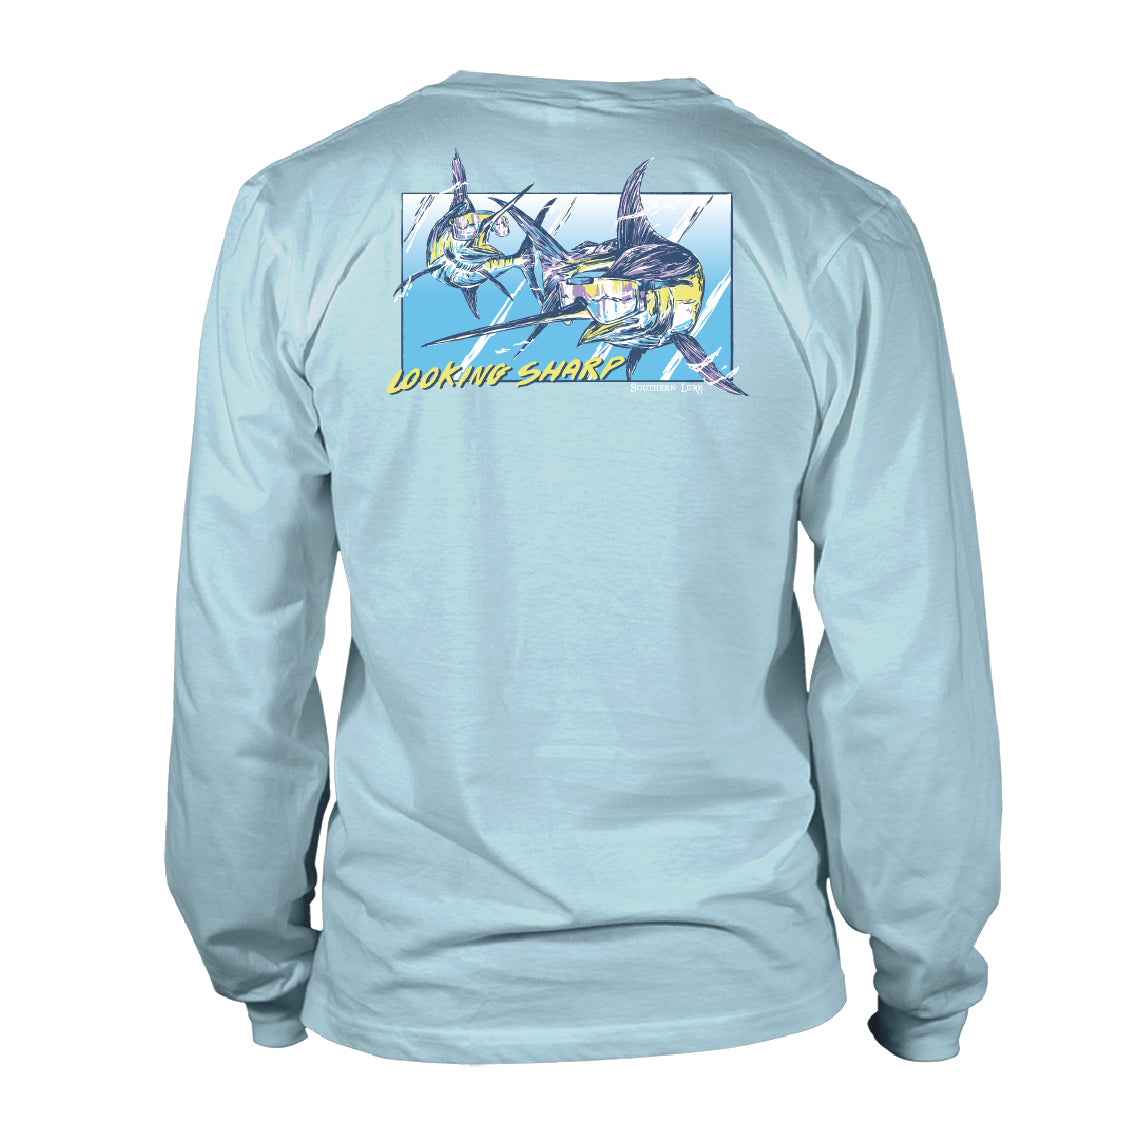 Youth & Toddler Long Sleeve Tee Looking Sharp - Blue